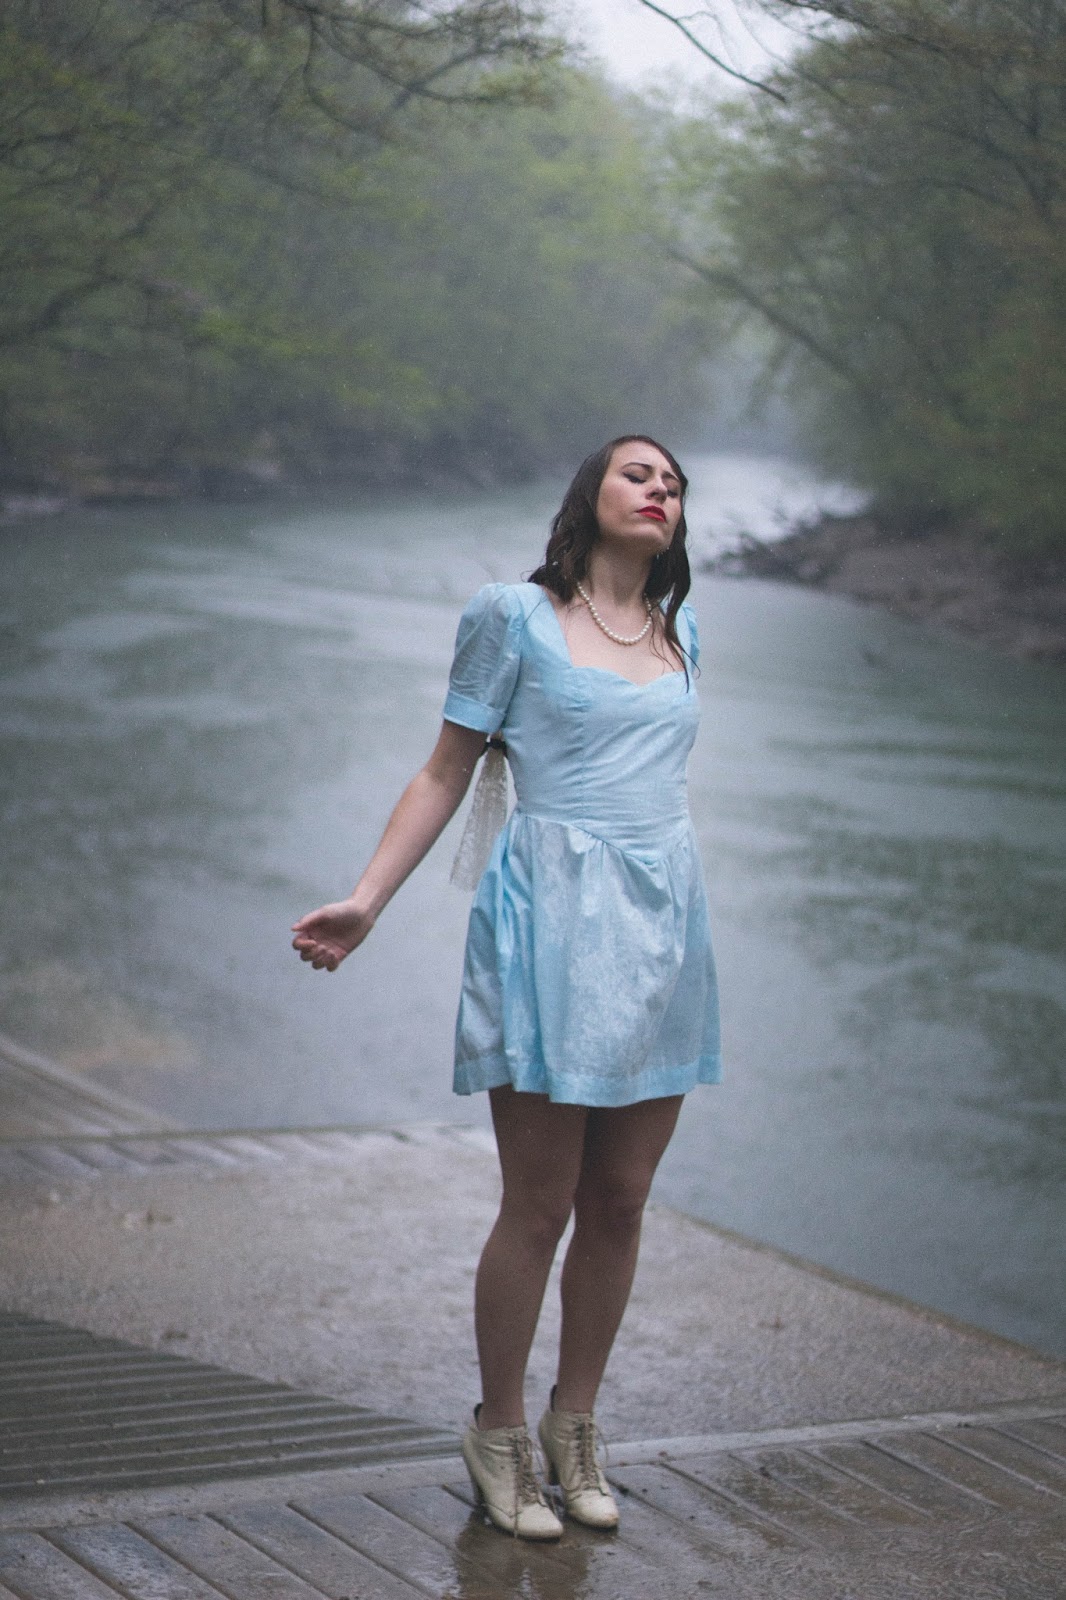 Vintage, style, retro, the notebook, allie hamilton, costume design, fashion blogger, feminine, girly, 1940s style, pretty, classic style, taylor swift style, outfit, red lips, rain photography, vintage pictures